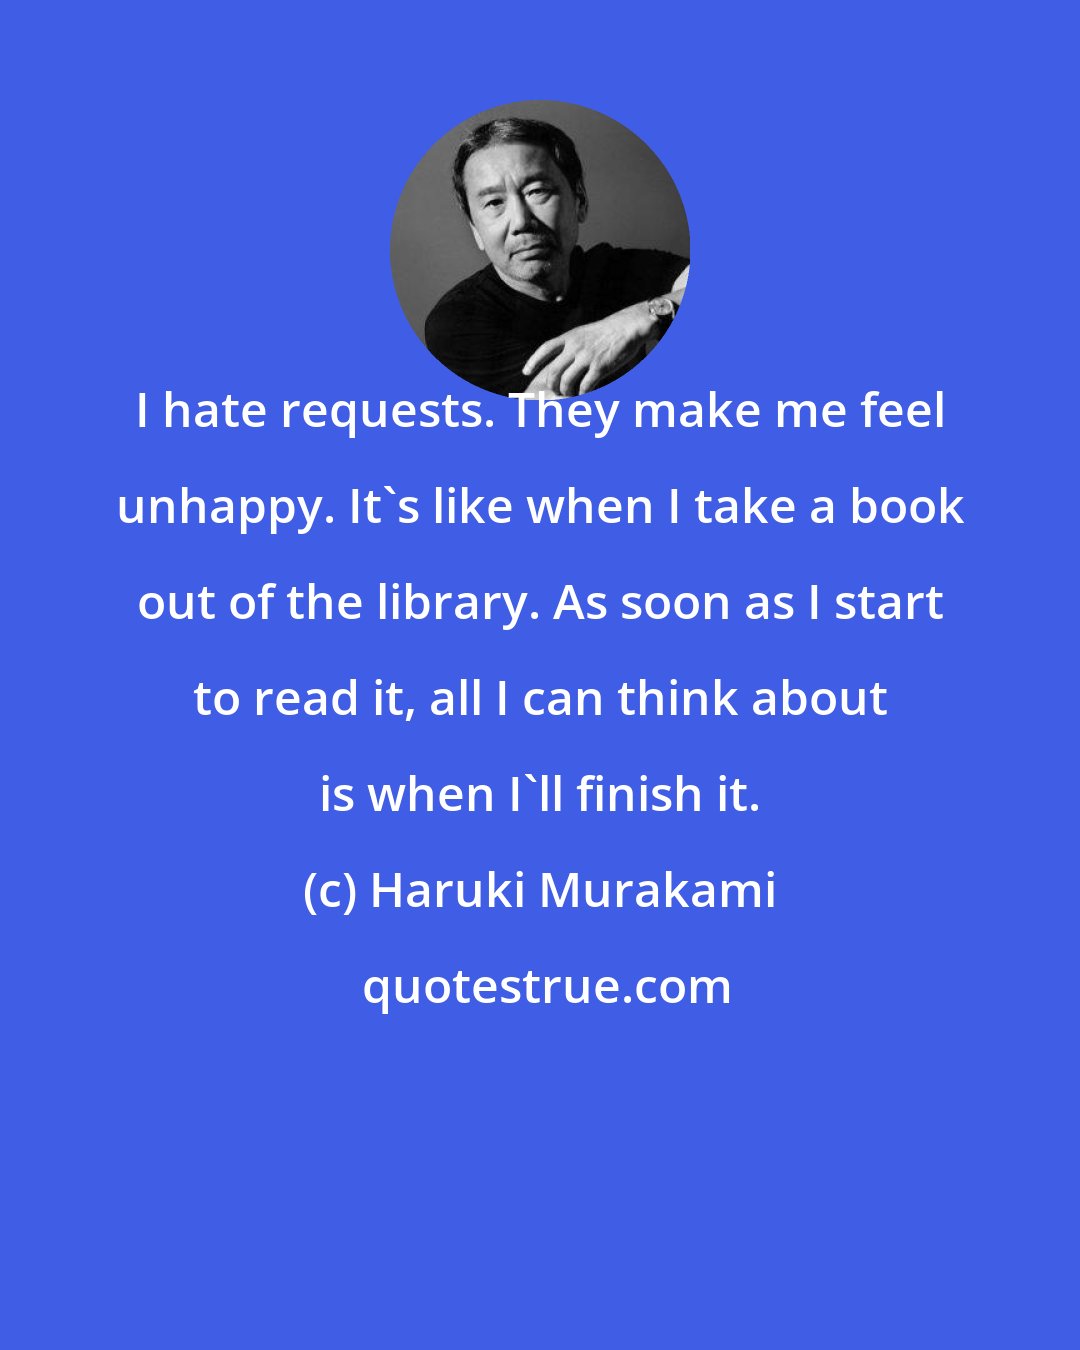 Haruki Murakami: I hate requests. They make me feel unhappy. It's like when I take a book out of the library. As soon as I start to read it, all I can think about is when I'll finish it.